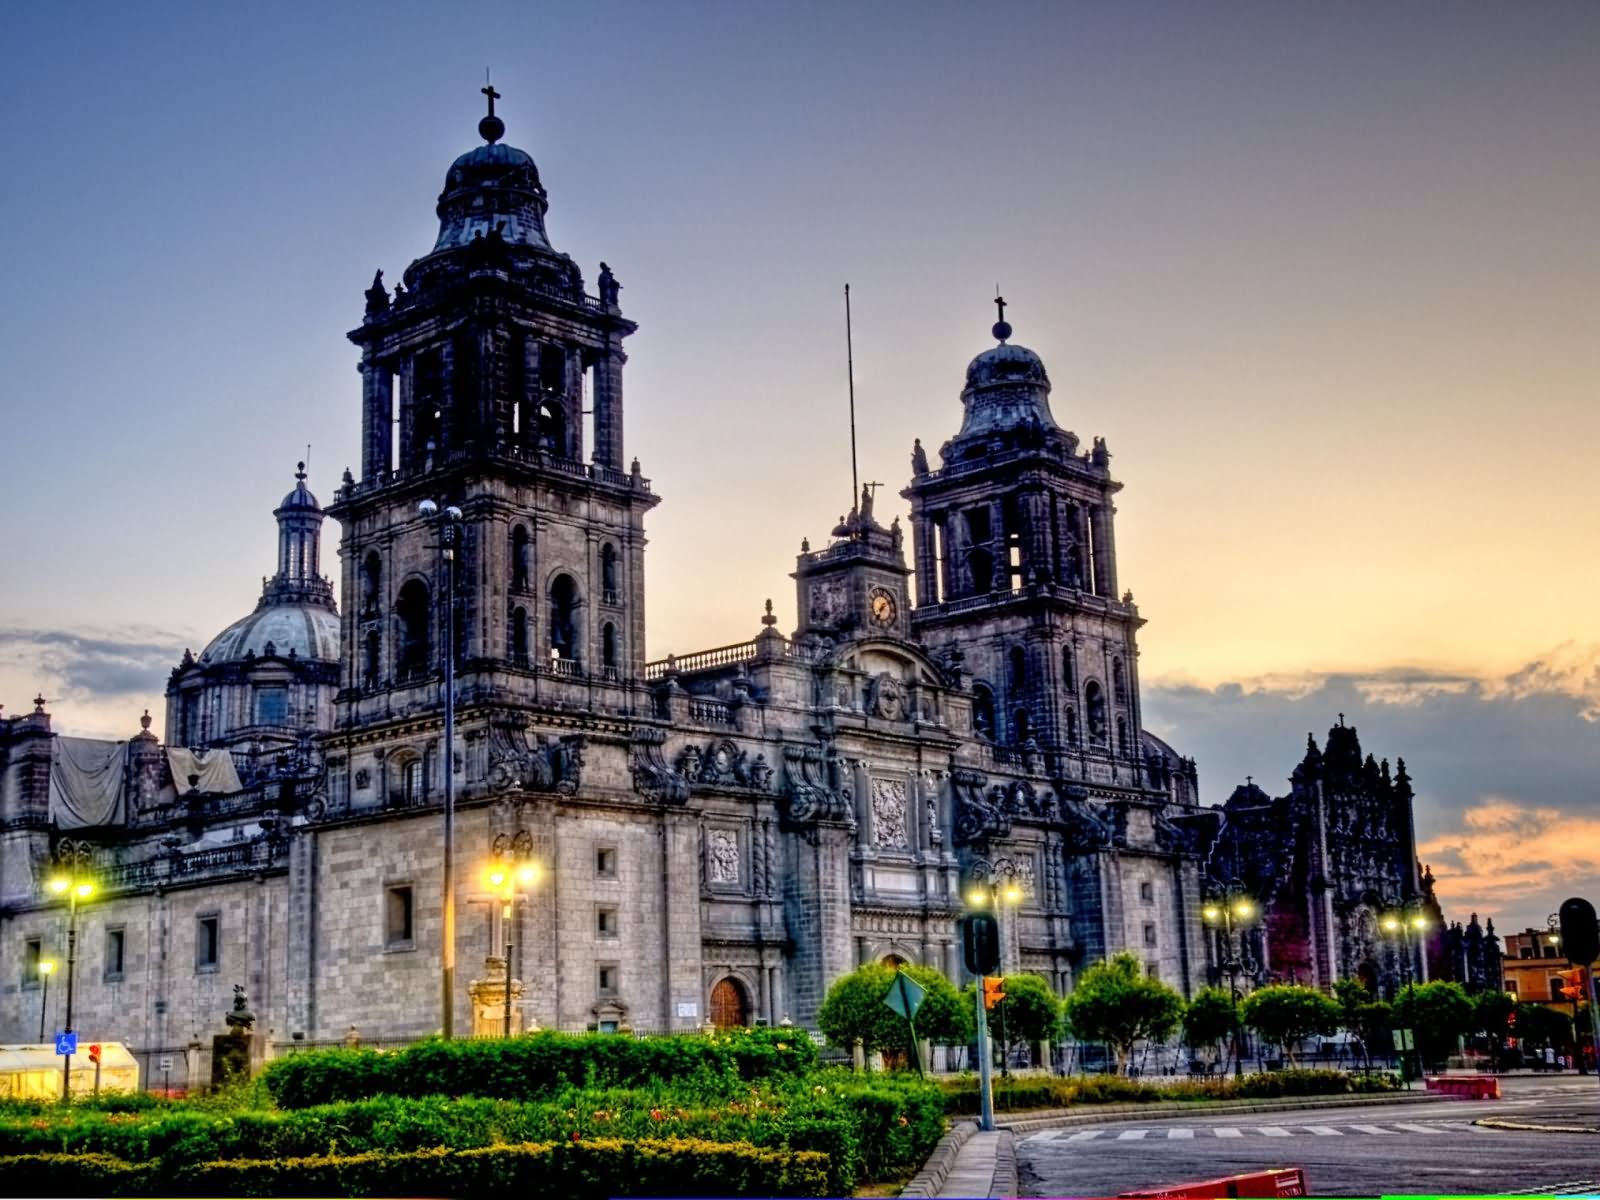 The Metropolitan Cathedral In Mexico City At Dusk